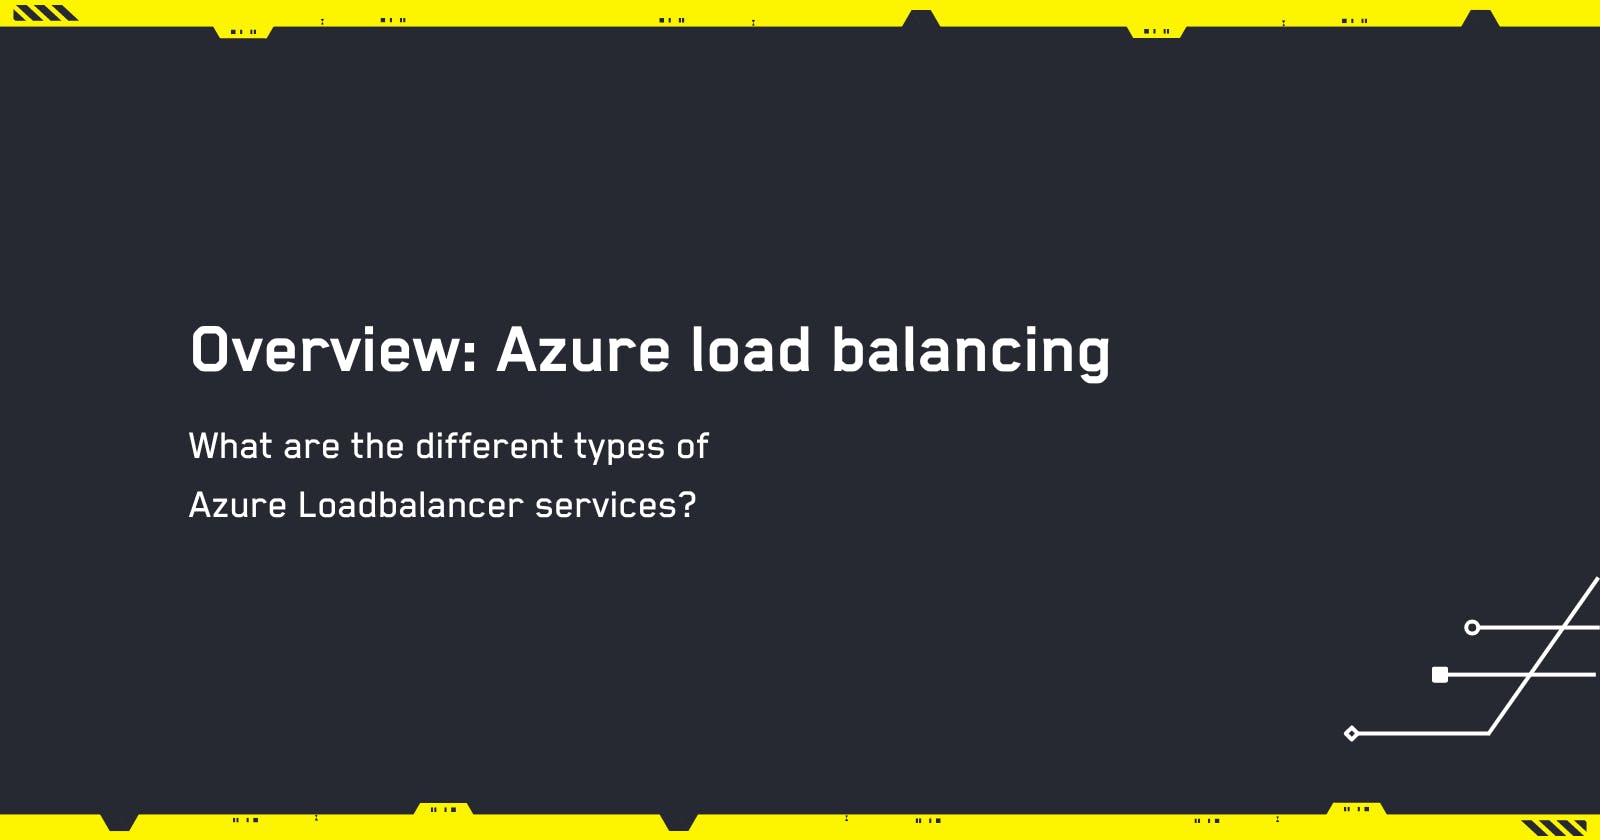 Overview: Azure load balancing